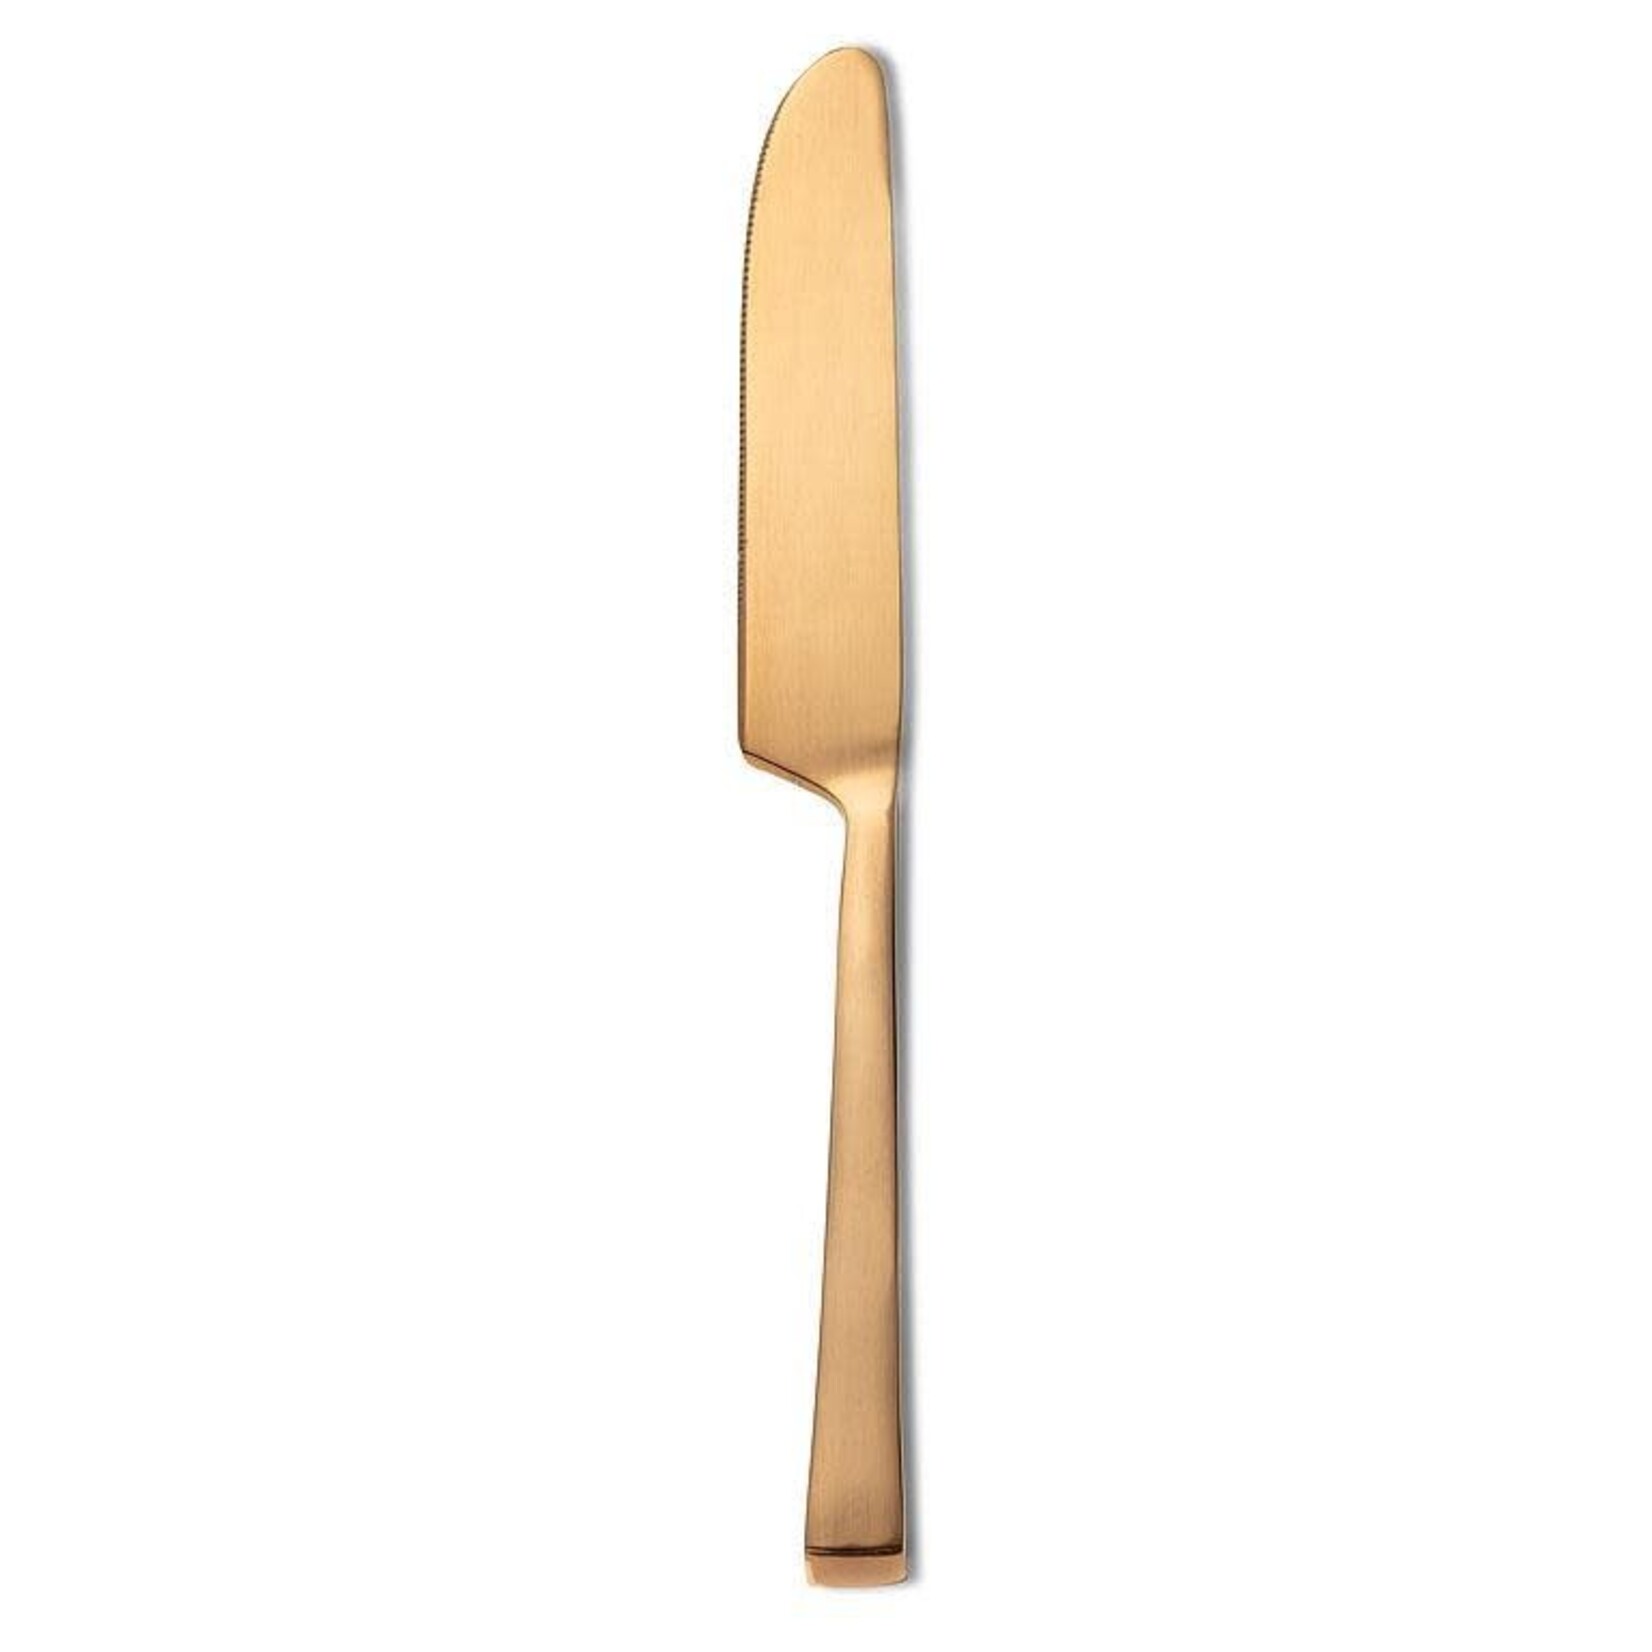 Copper Square Handle Knife - Large